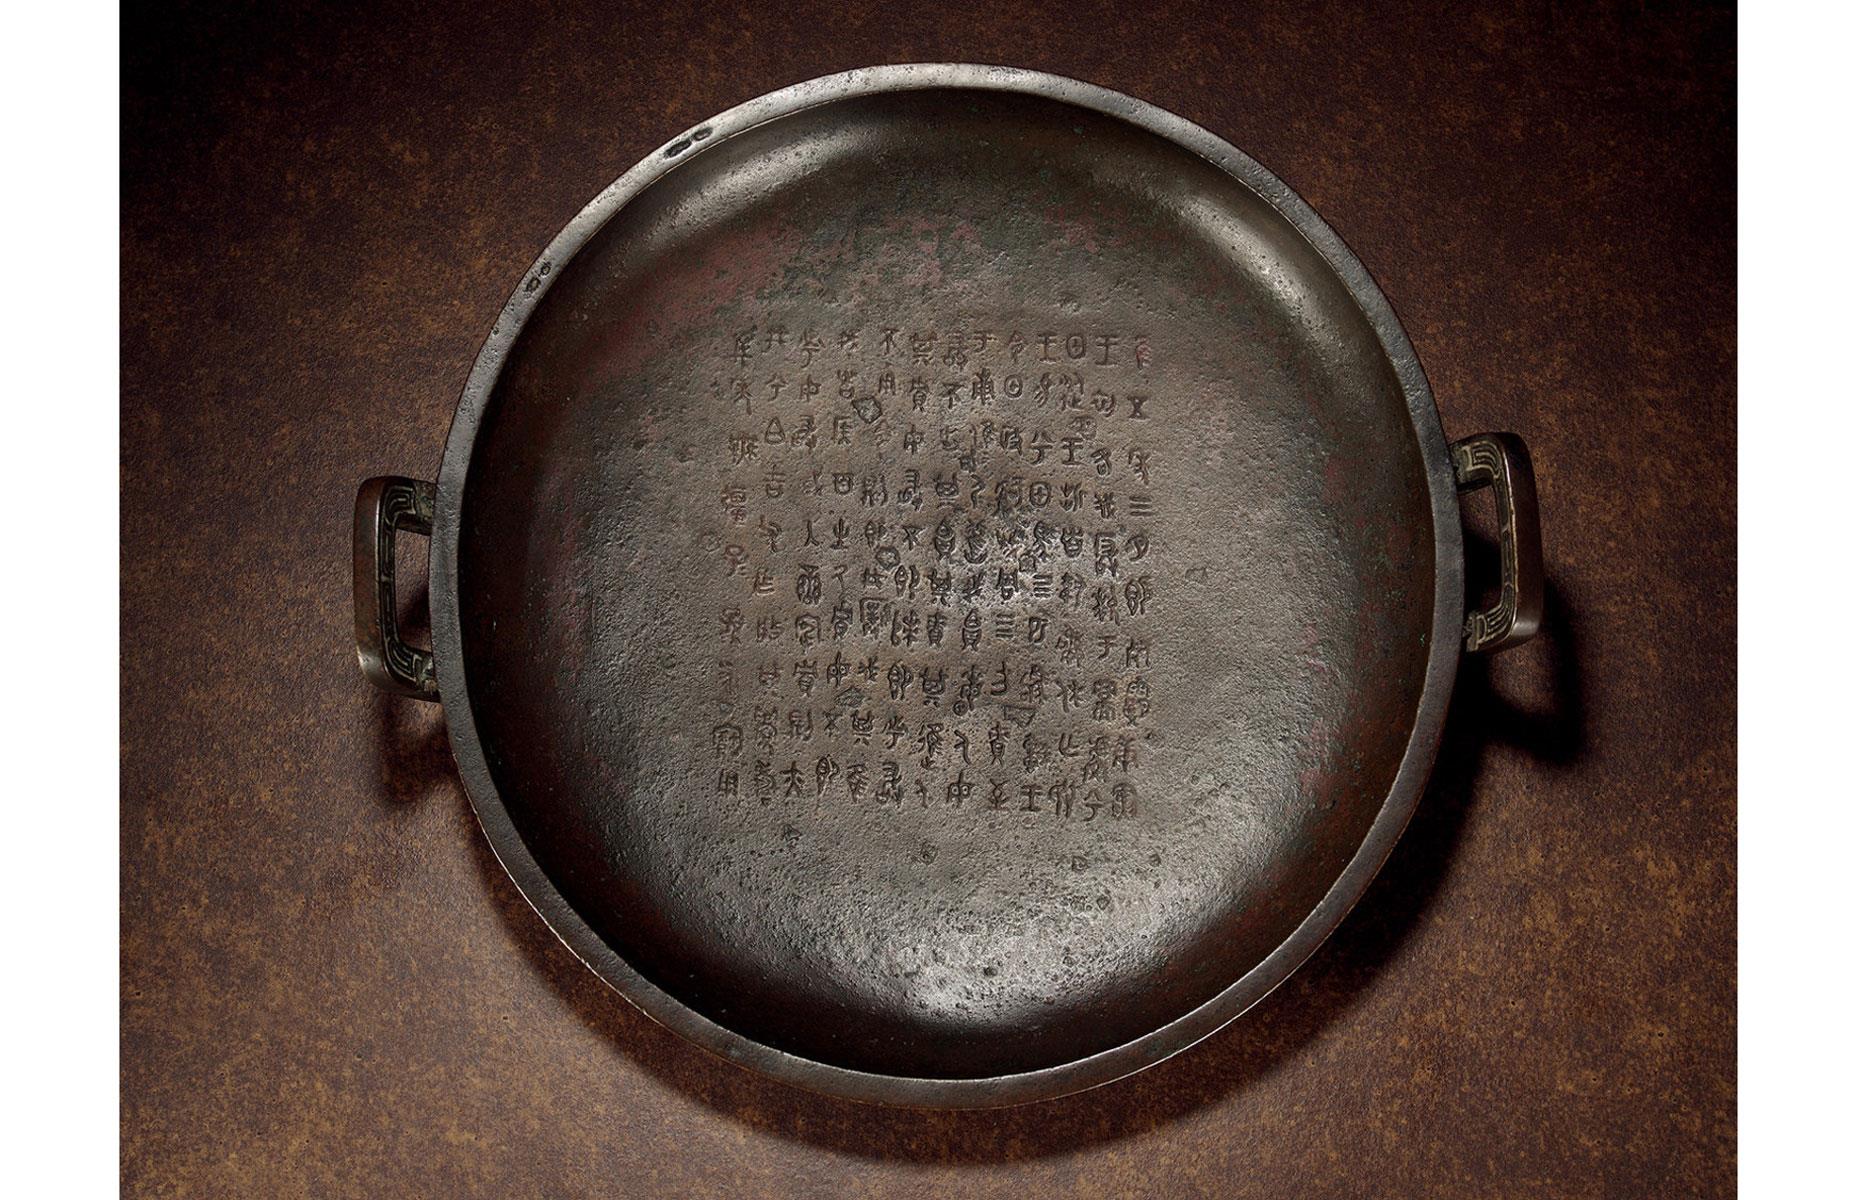 July: an ancient Chinese bronze plate sells for a record $27.3 million (£20.8m)